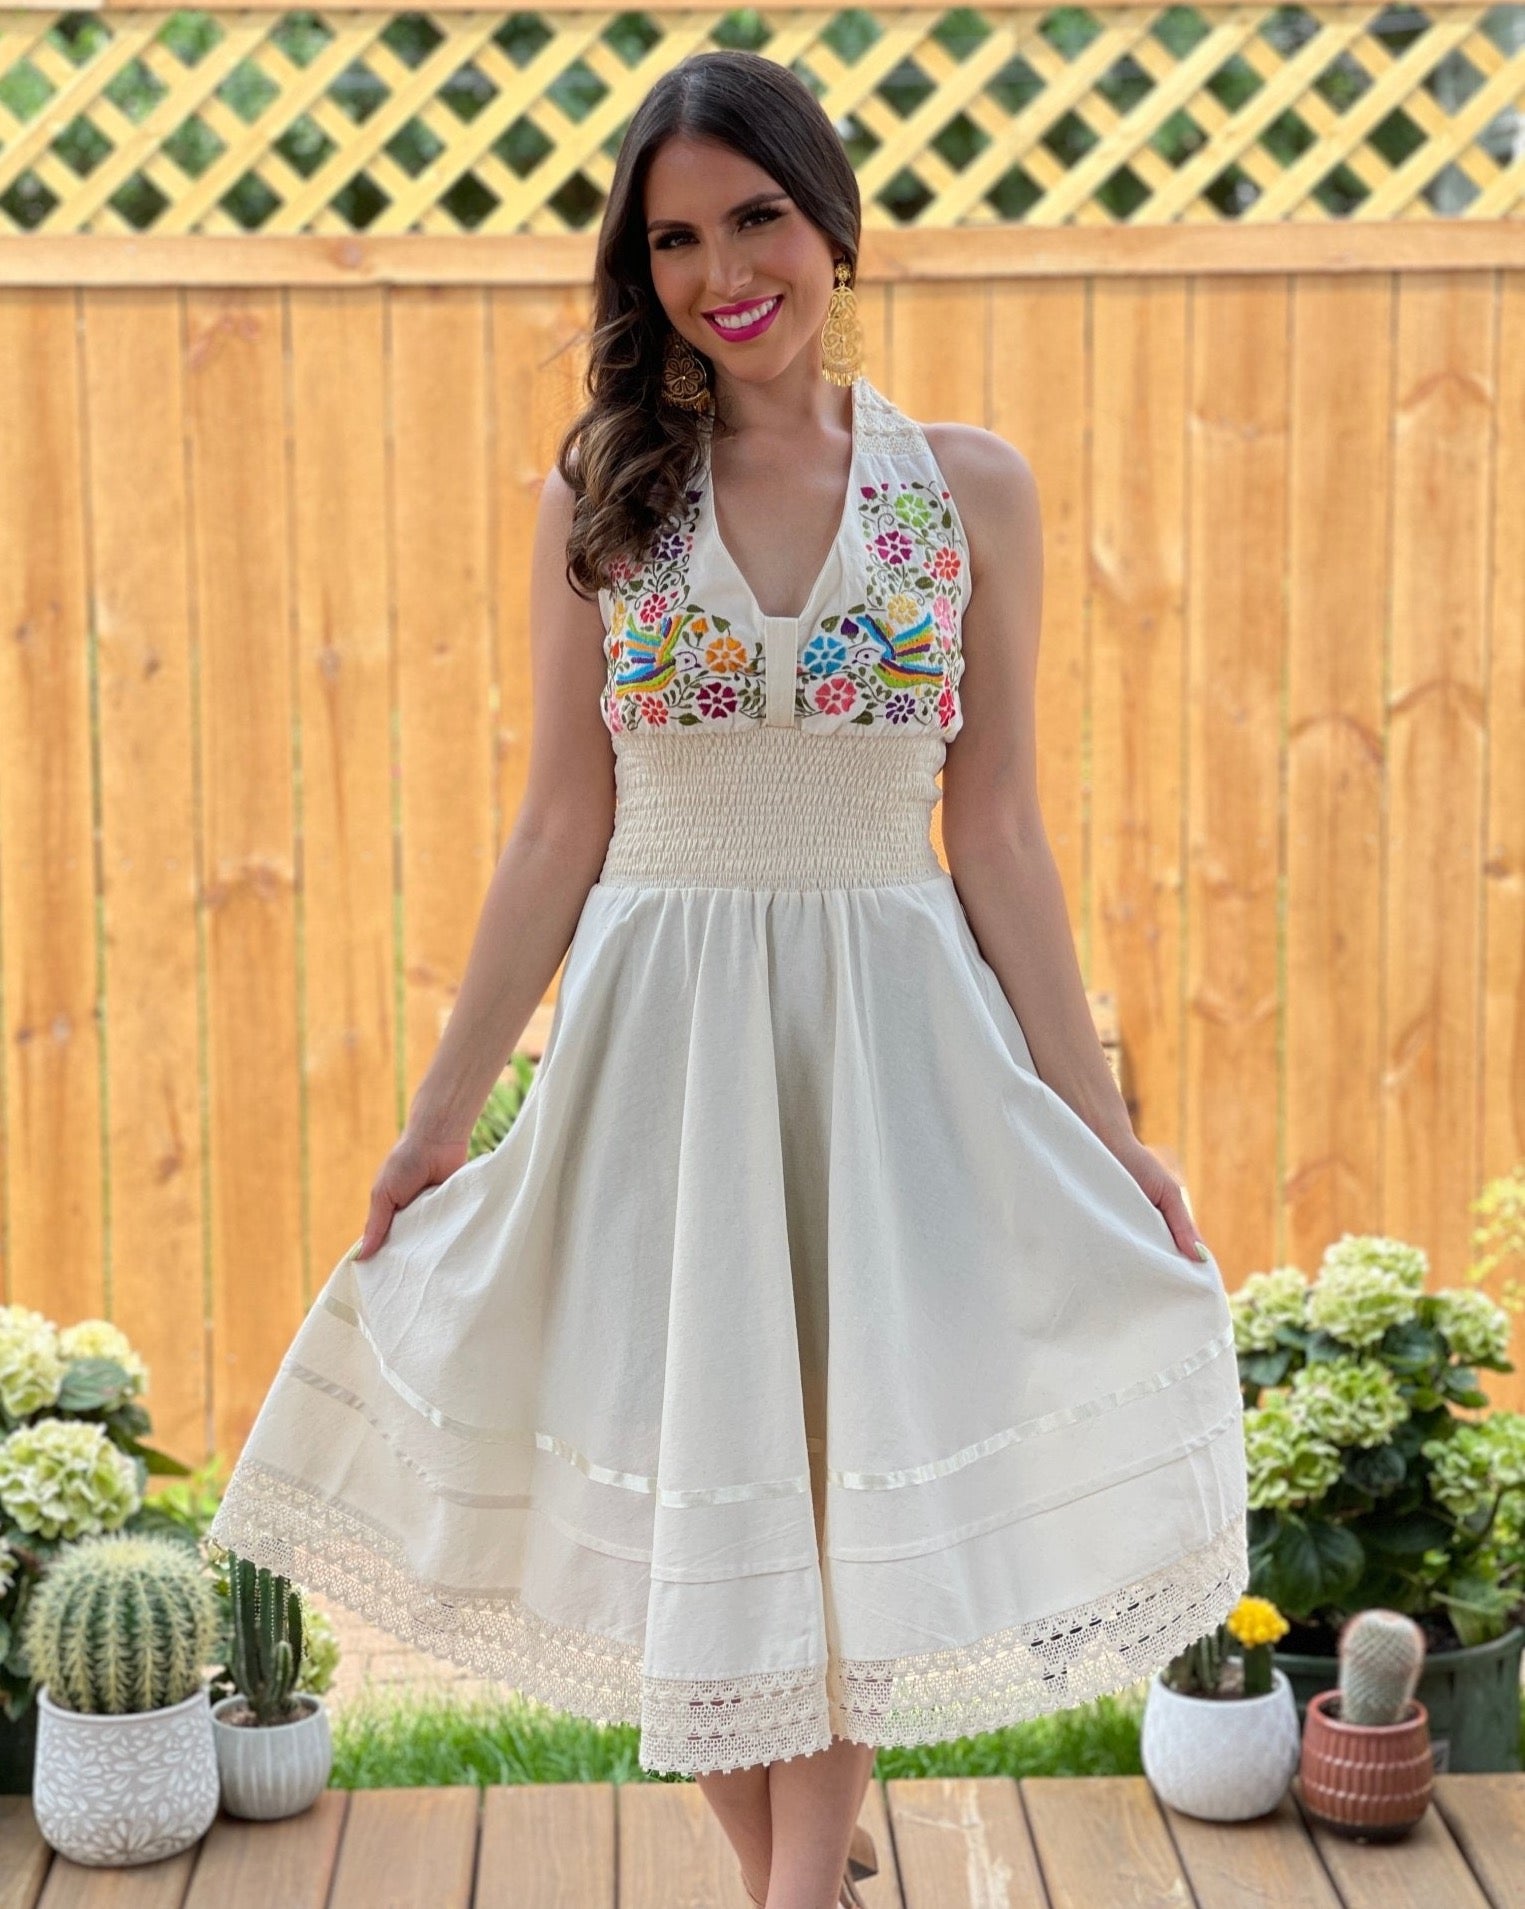 Mexican floral Embroidered  halter dress in Beige with Multicolor embroidery.